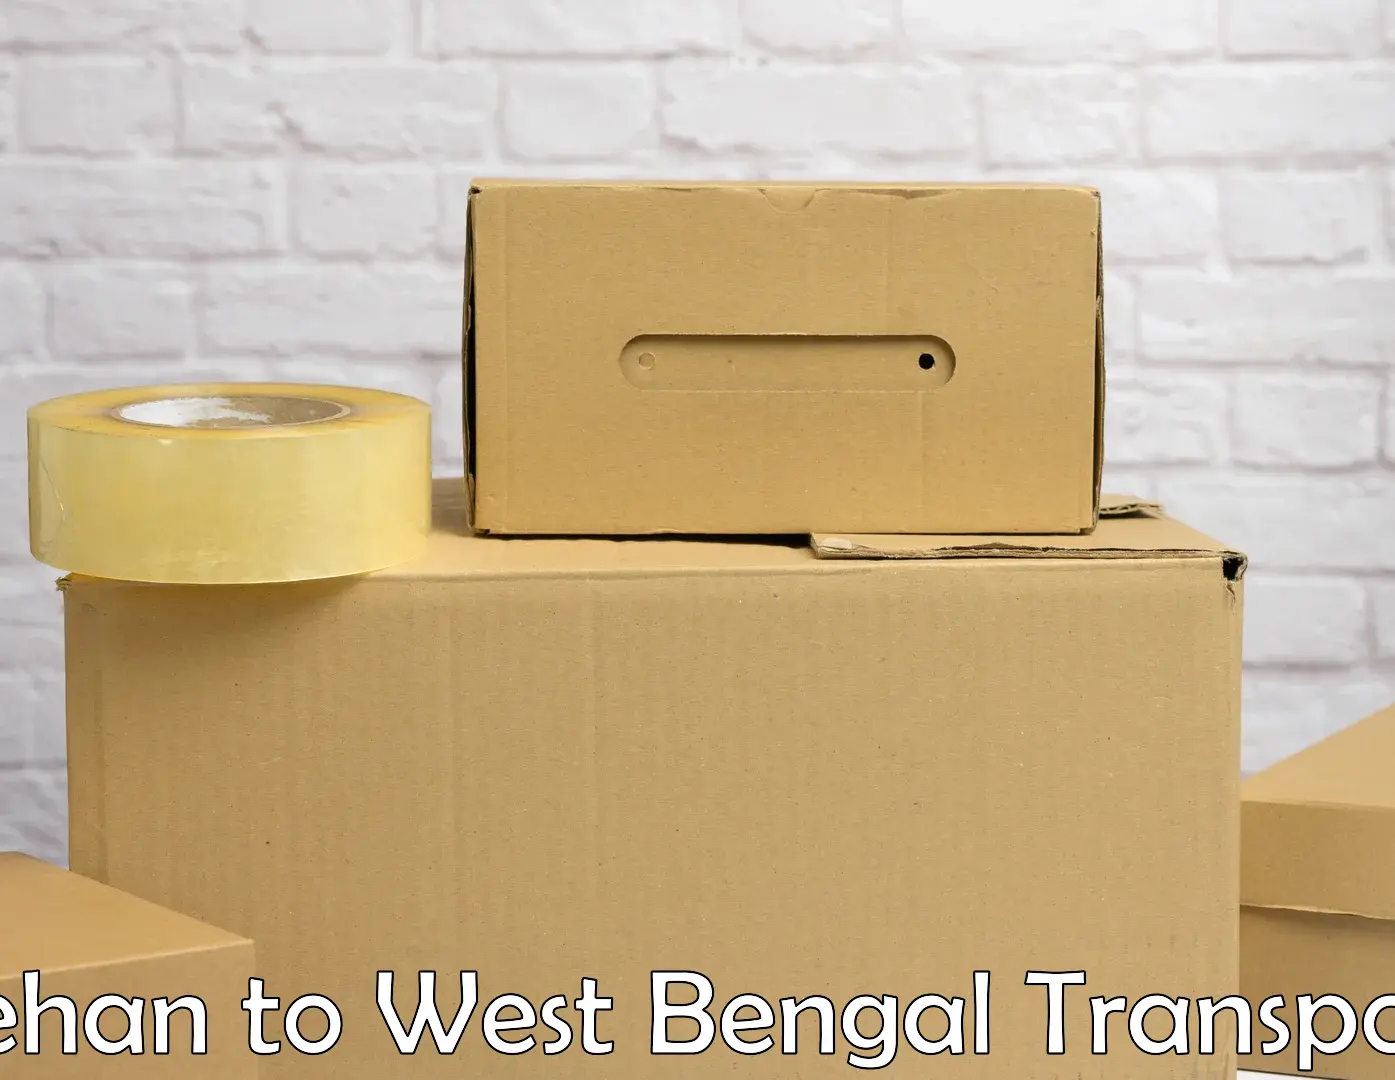 Inland transportation services in Rehan to West Bengal